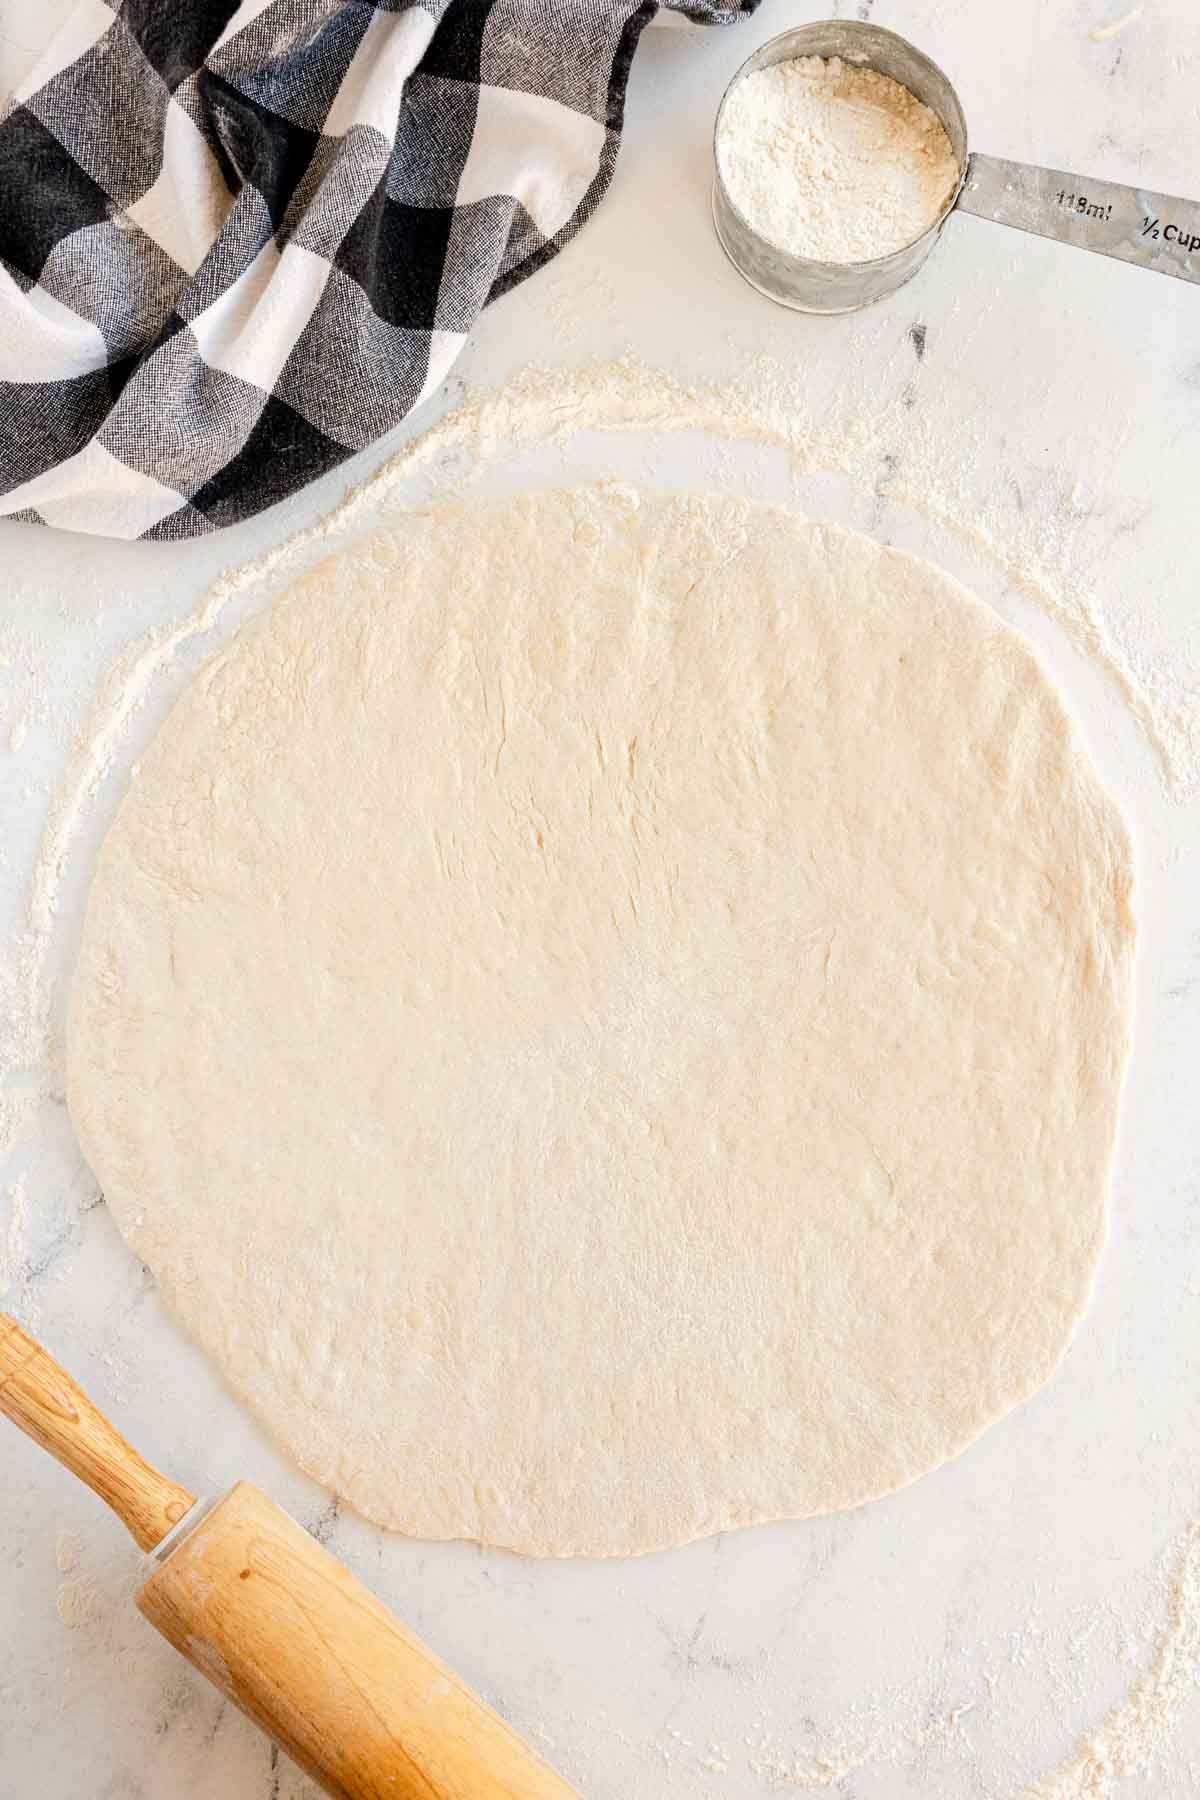 rolled out pizza dough on a floured surface